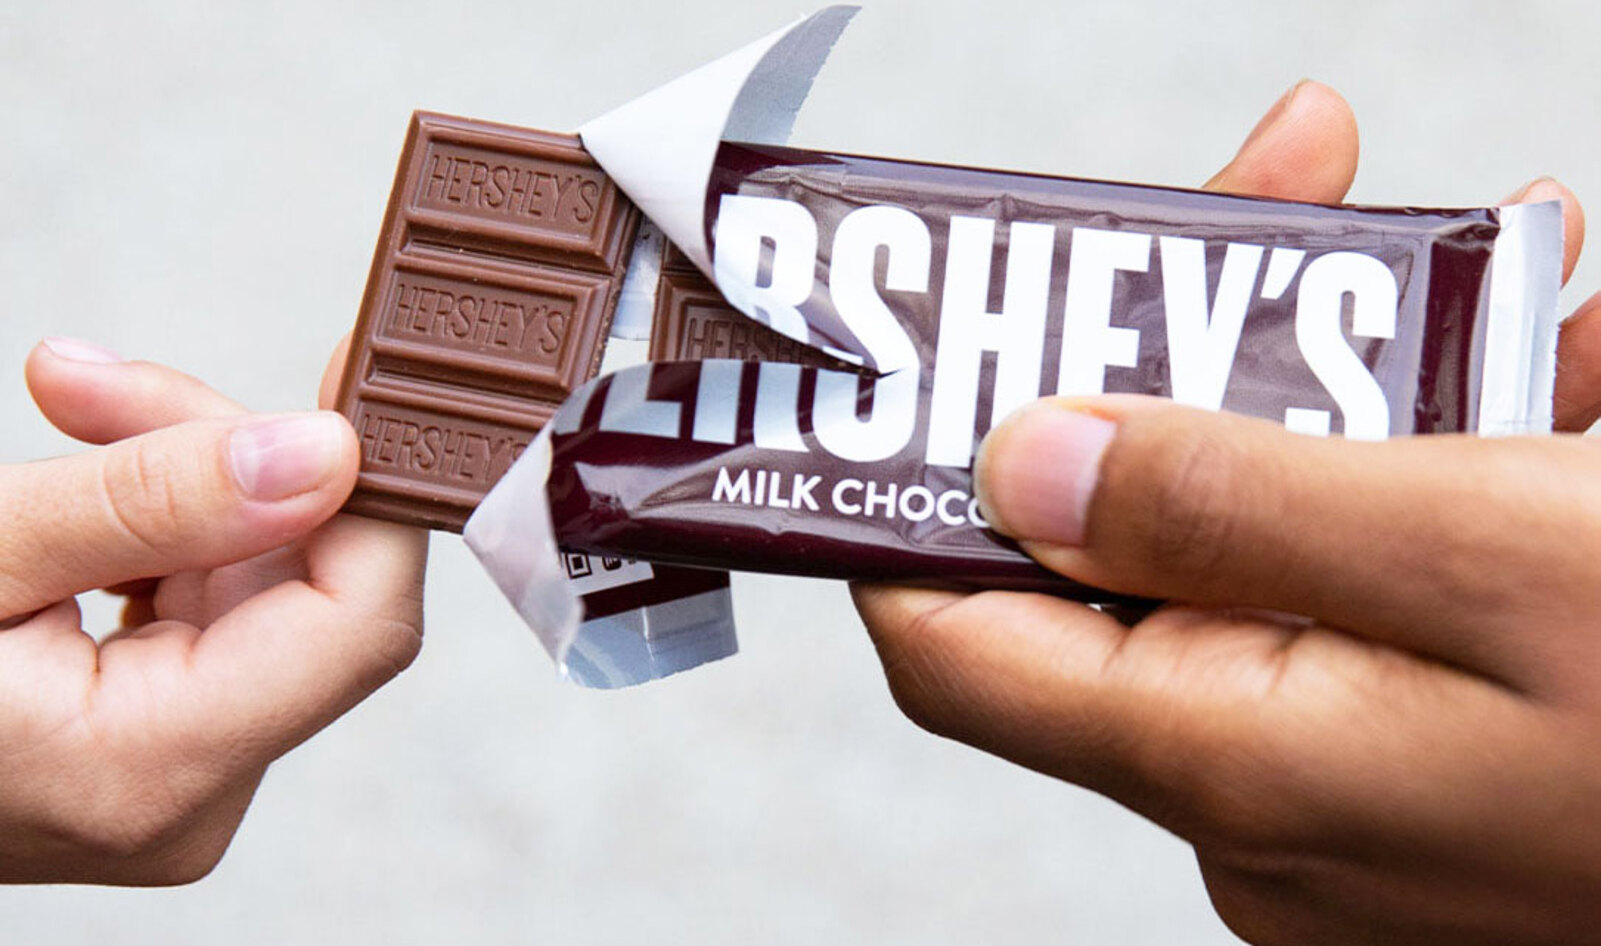 Hershey Commits to Adding Plant-Based Chocolate Products